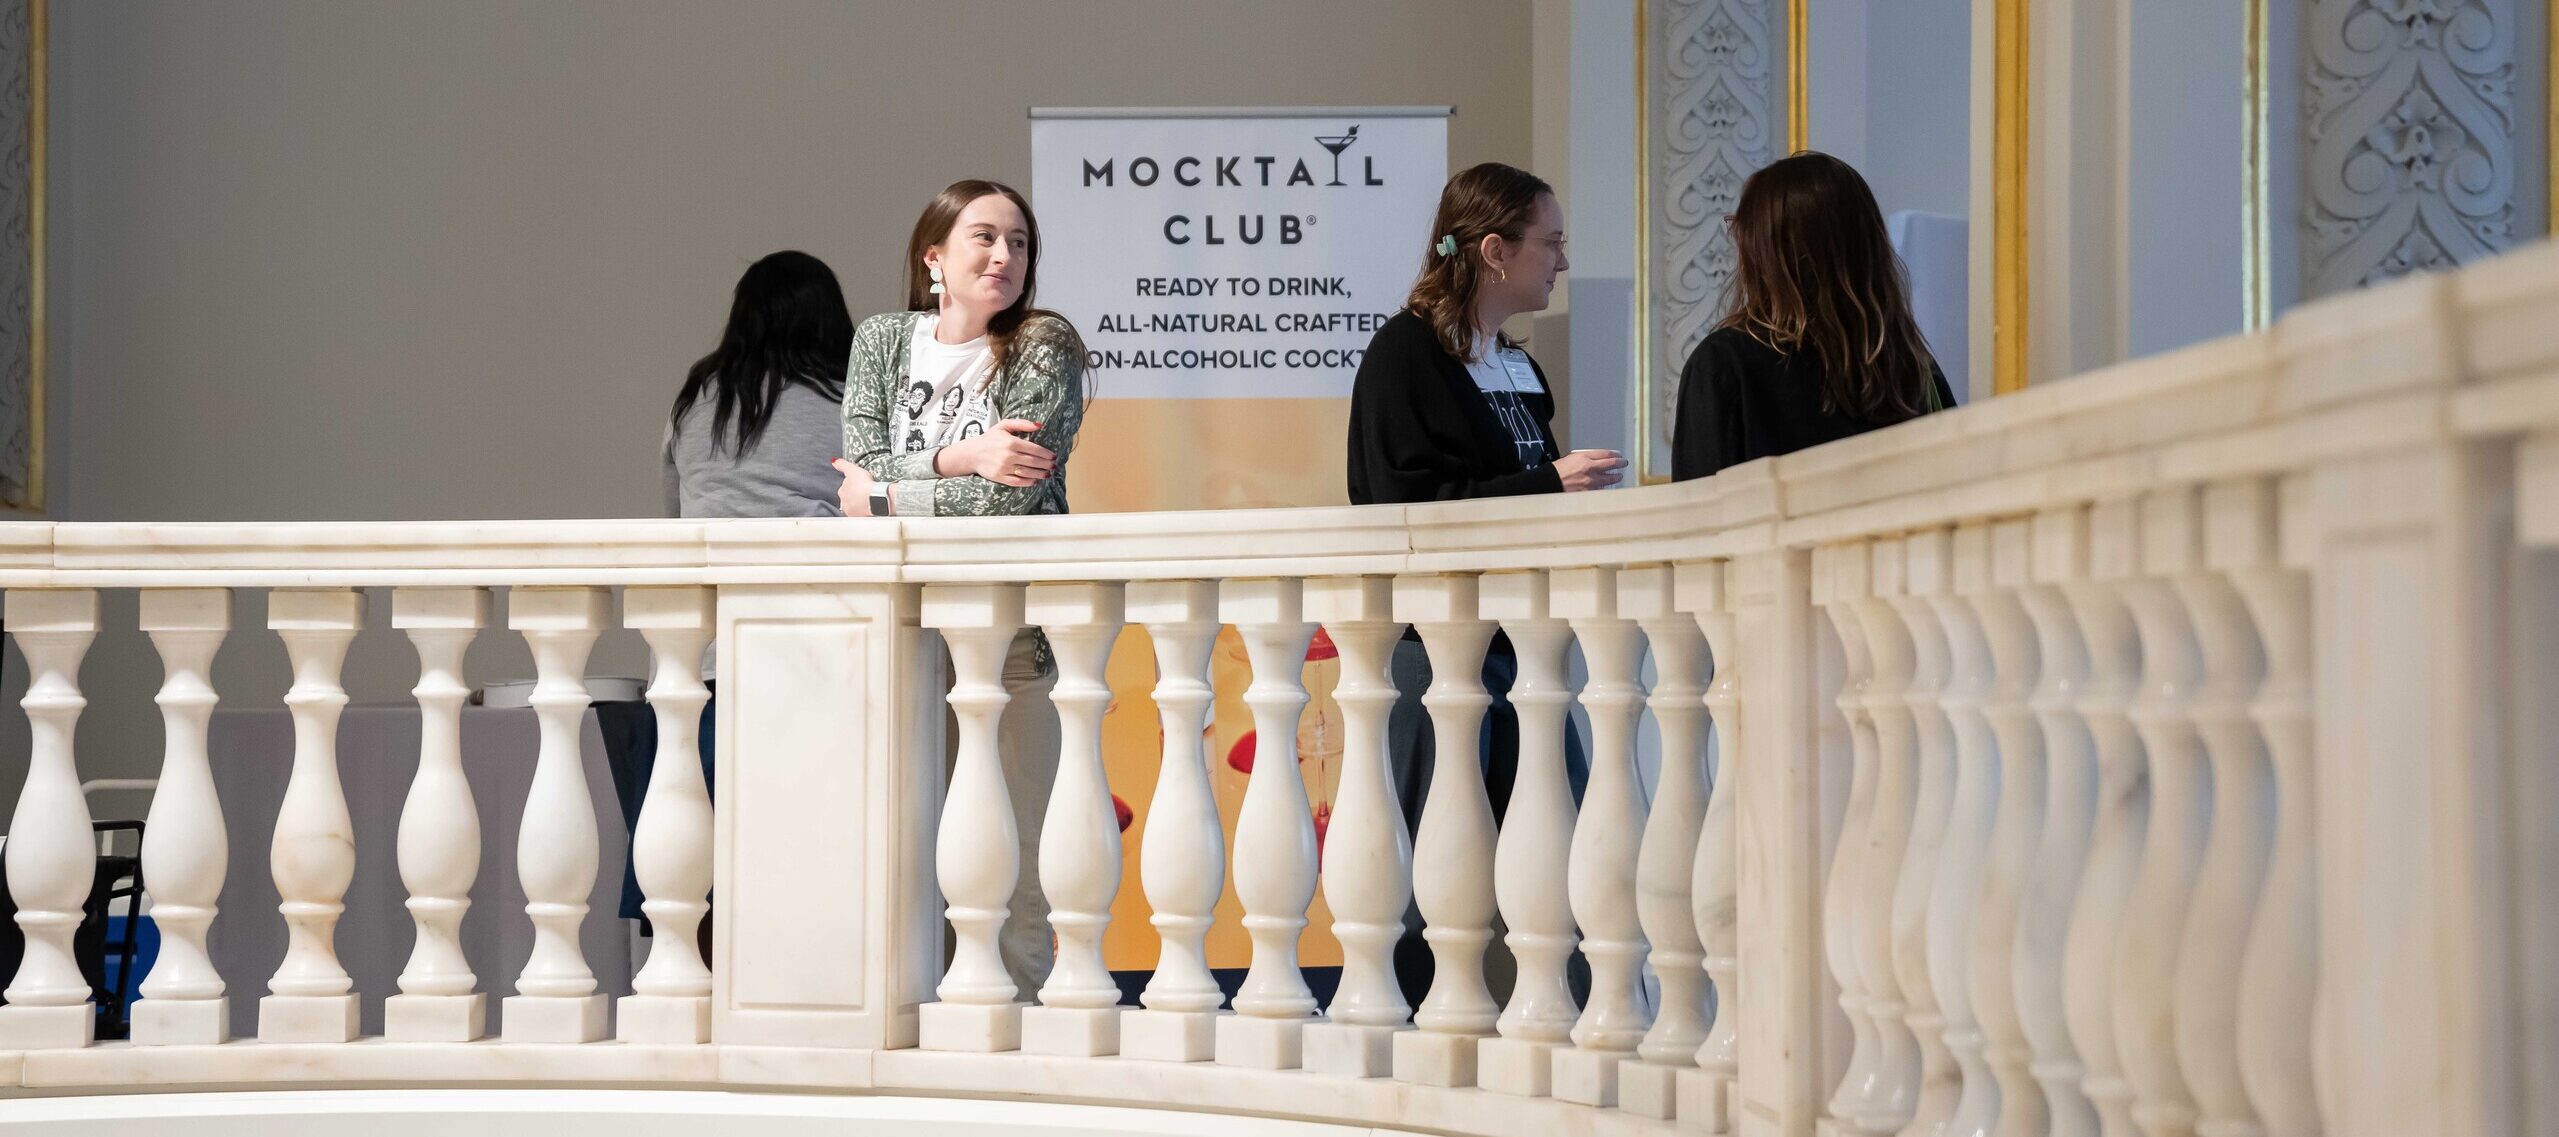 Four women are standing by a balustrade. One of the women is leaning against it. She has a light skin tone, long hair, and is wearing a white graphic tee. She is standing in front of a sign that says 